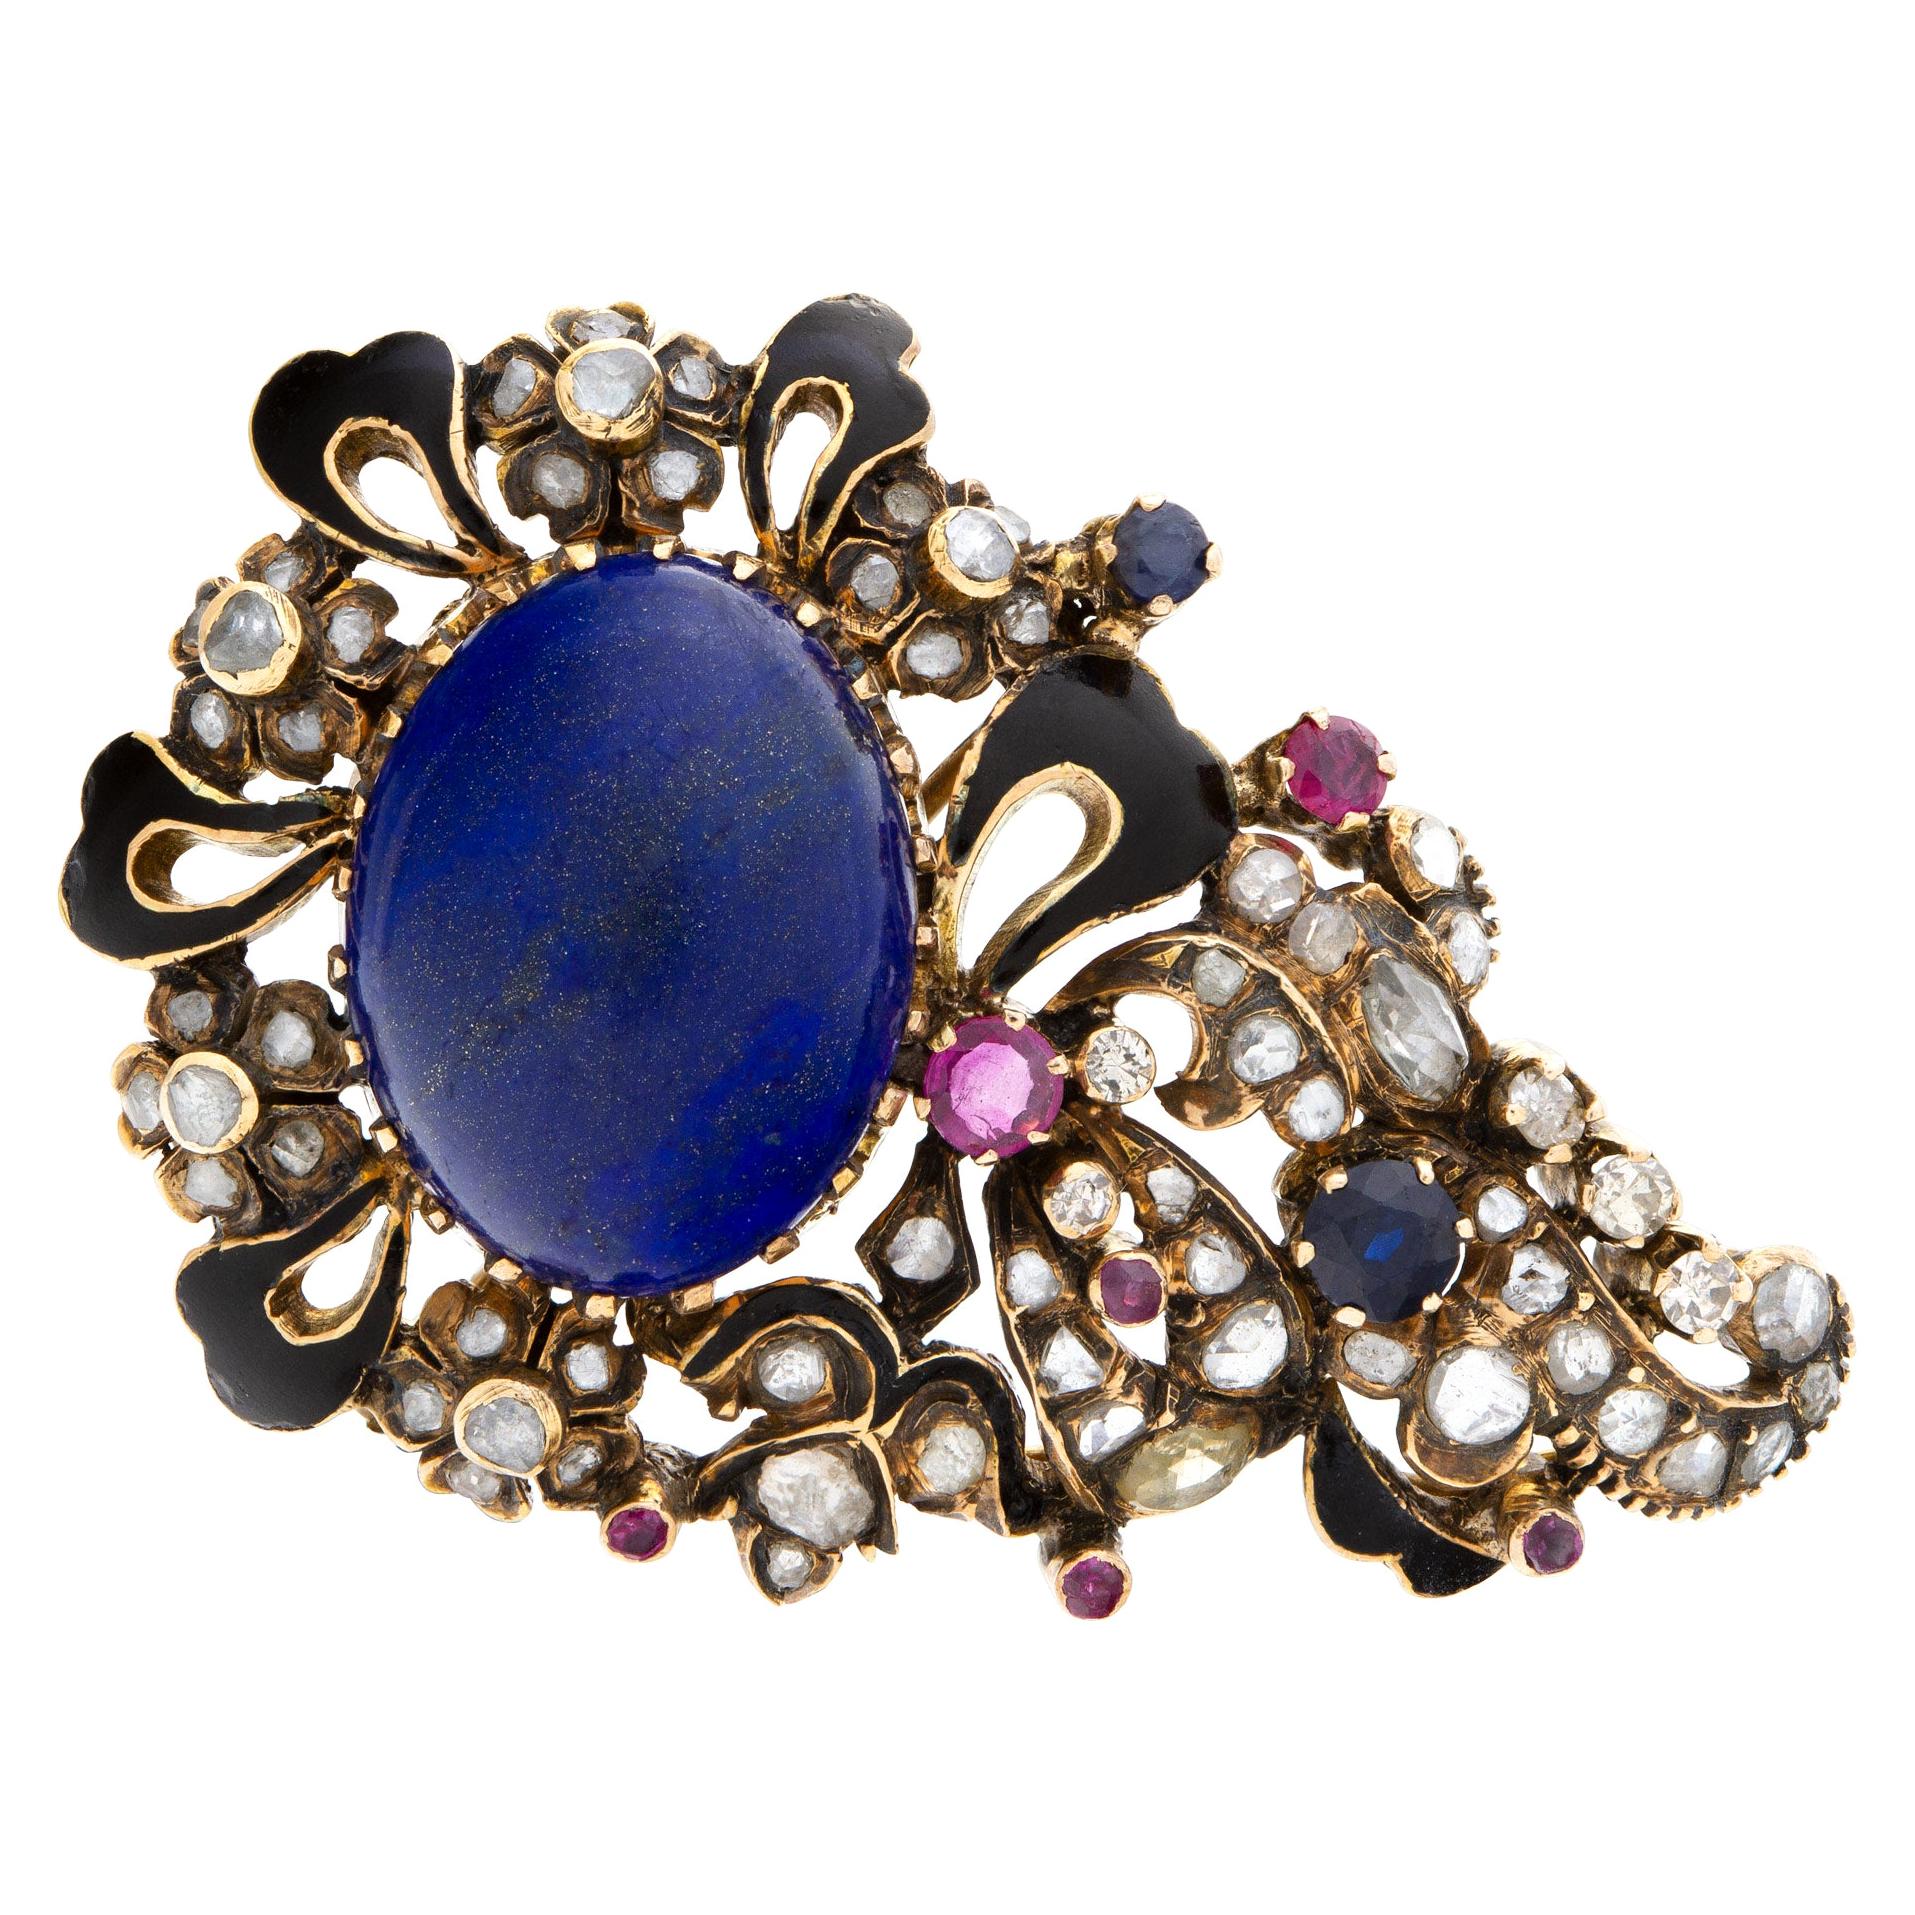 Antique Brooch with Cabochon Lapis Lazuli Center and Rose & Diamonds For Sale